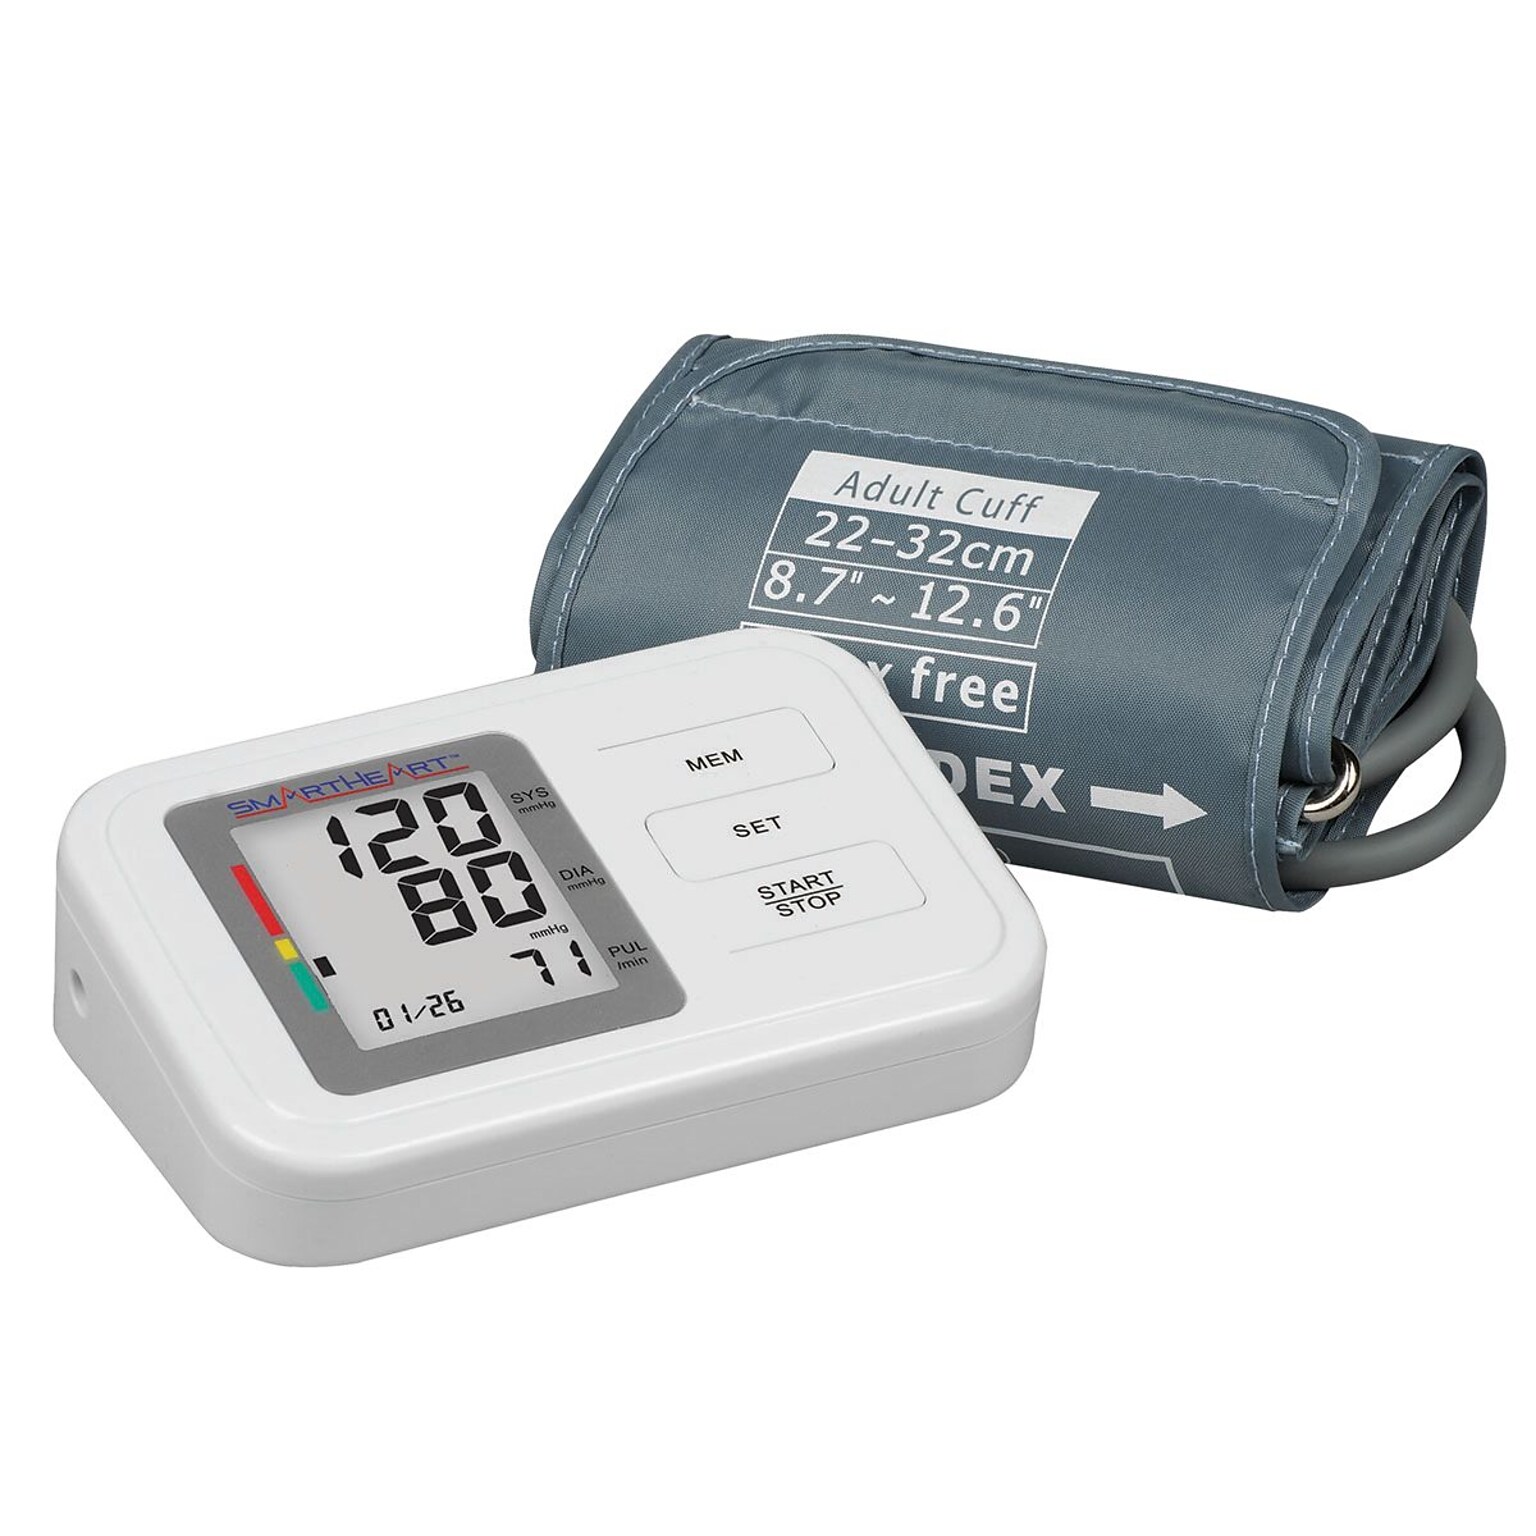 Blood pressure Cuff and Pulse - Auto Inflate